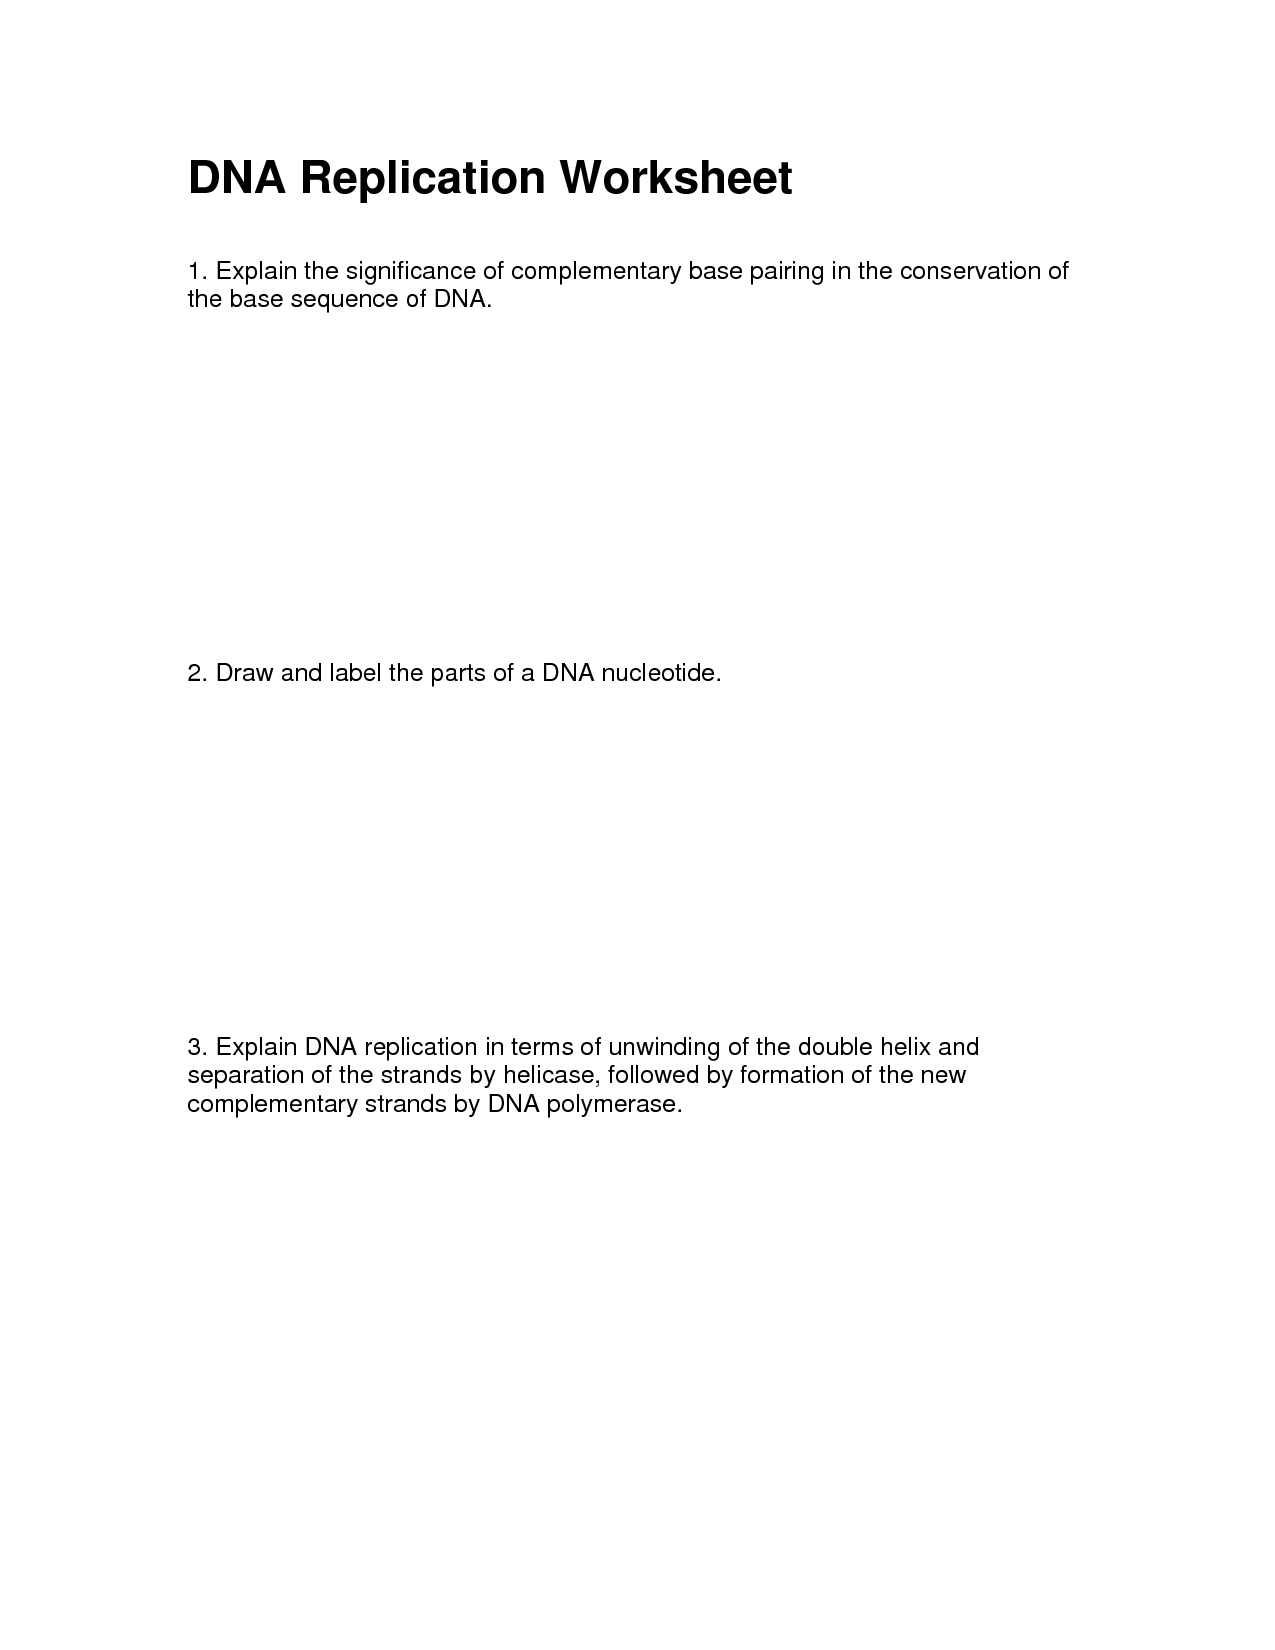 DNA Replication Complementary Base Pairing Worksheets